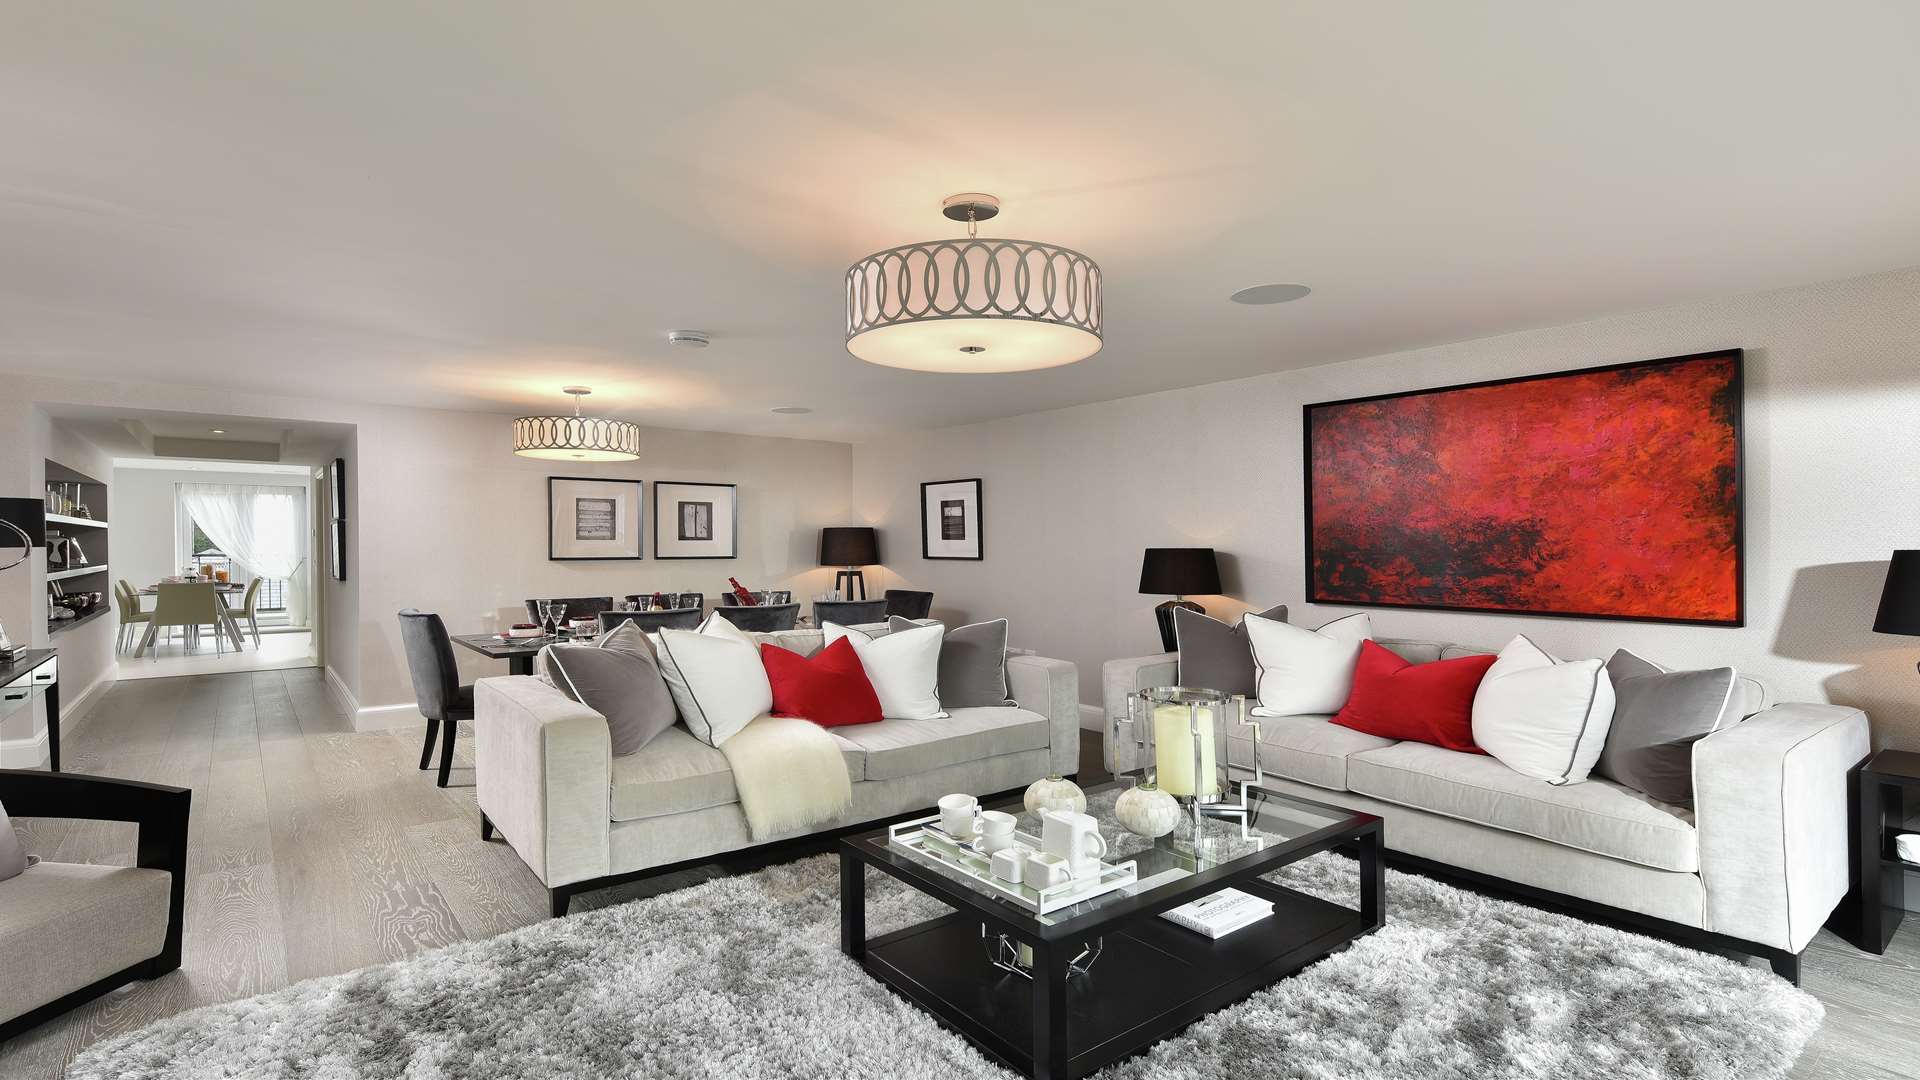 A £1.25million show home at the luxury development